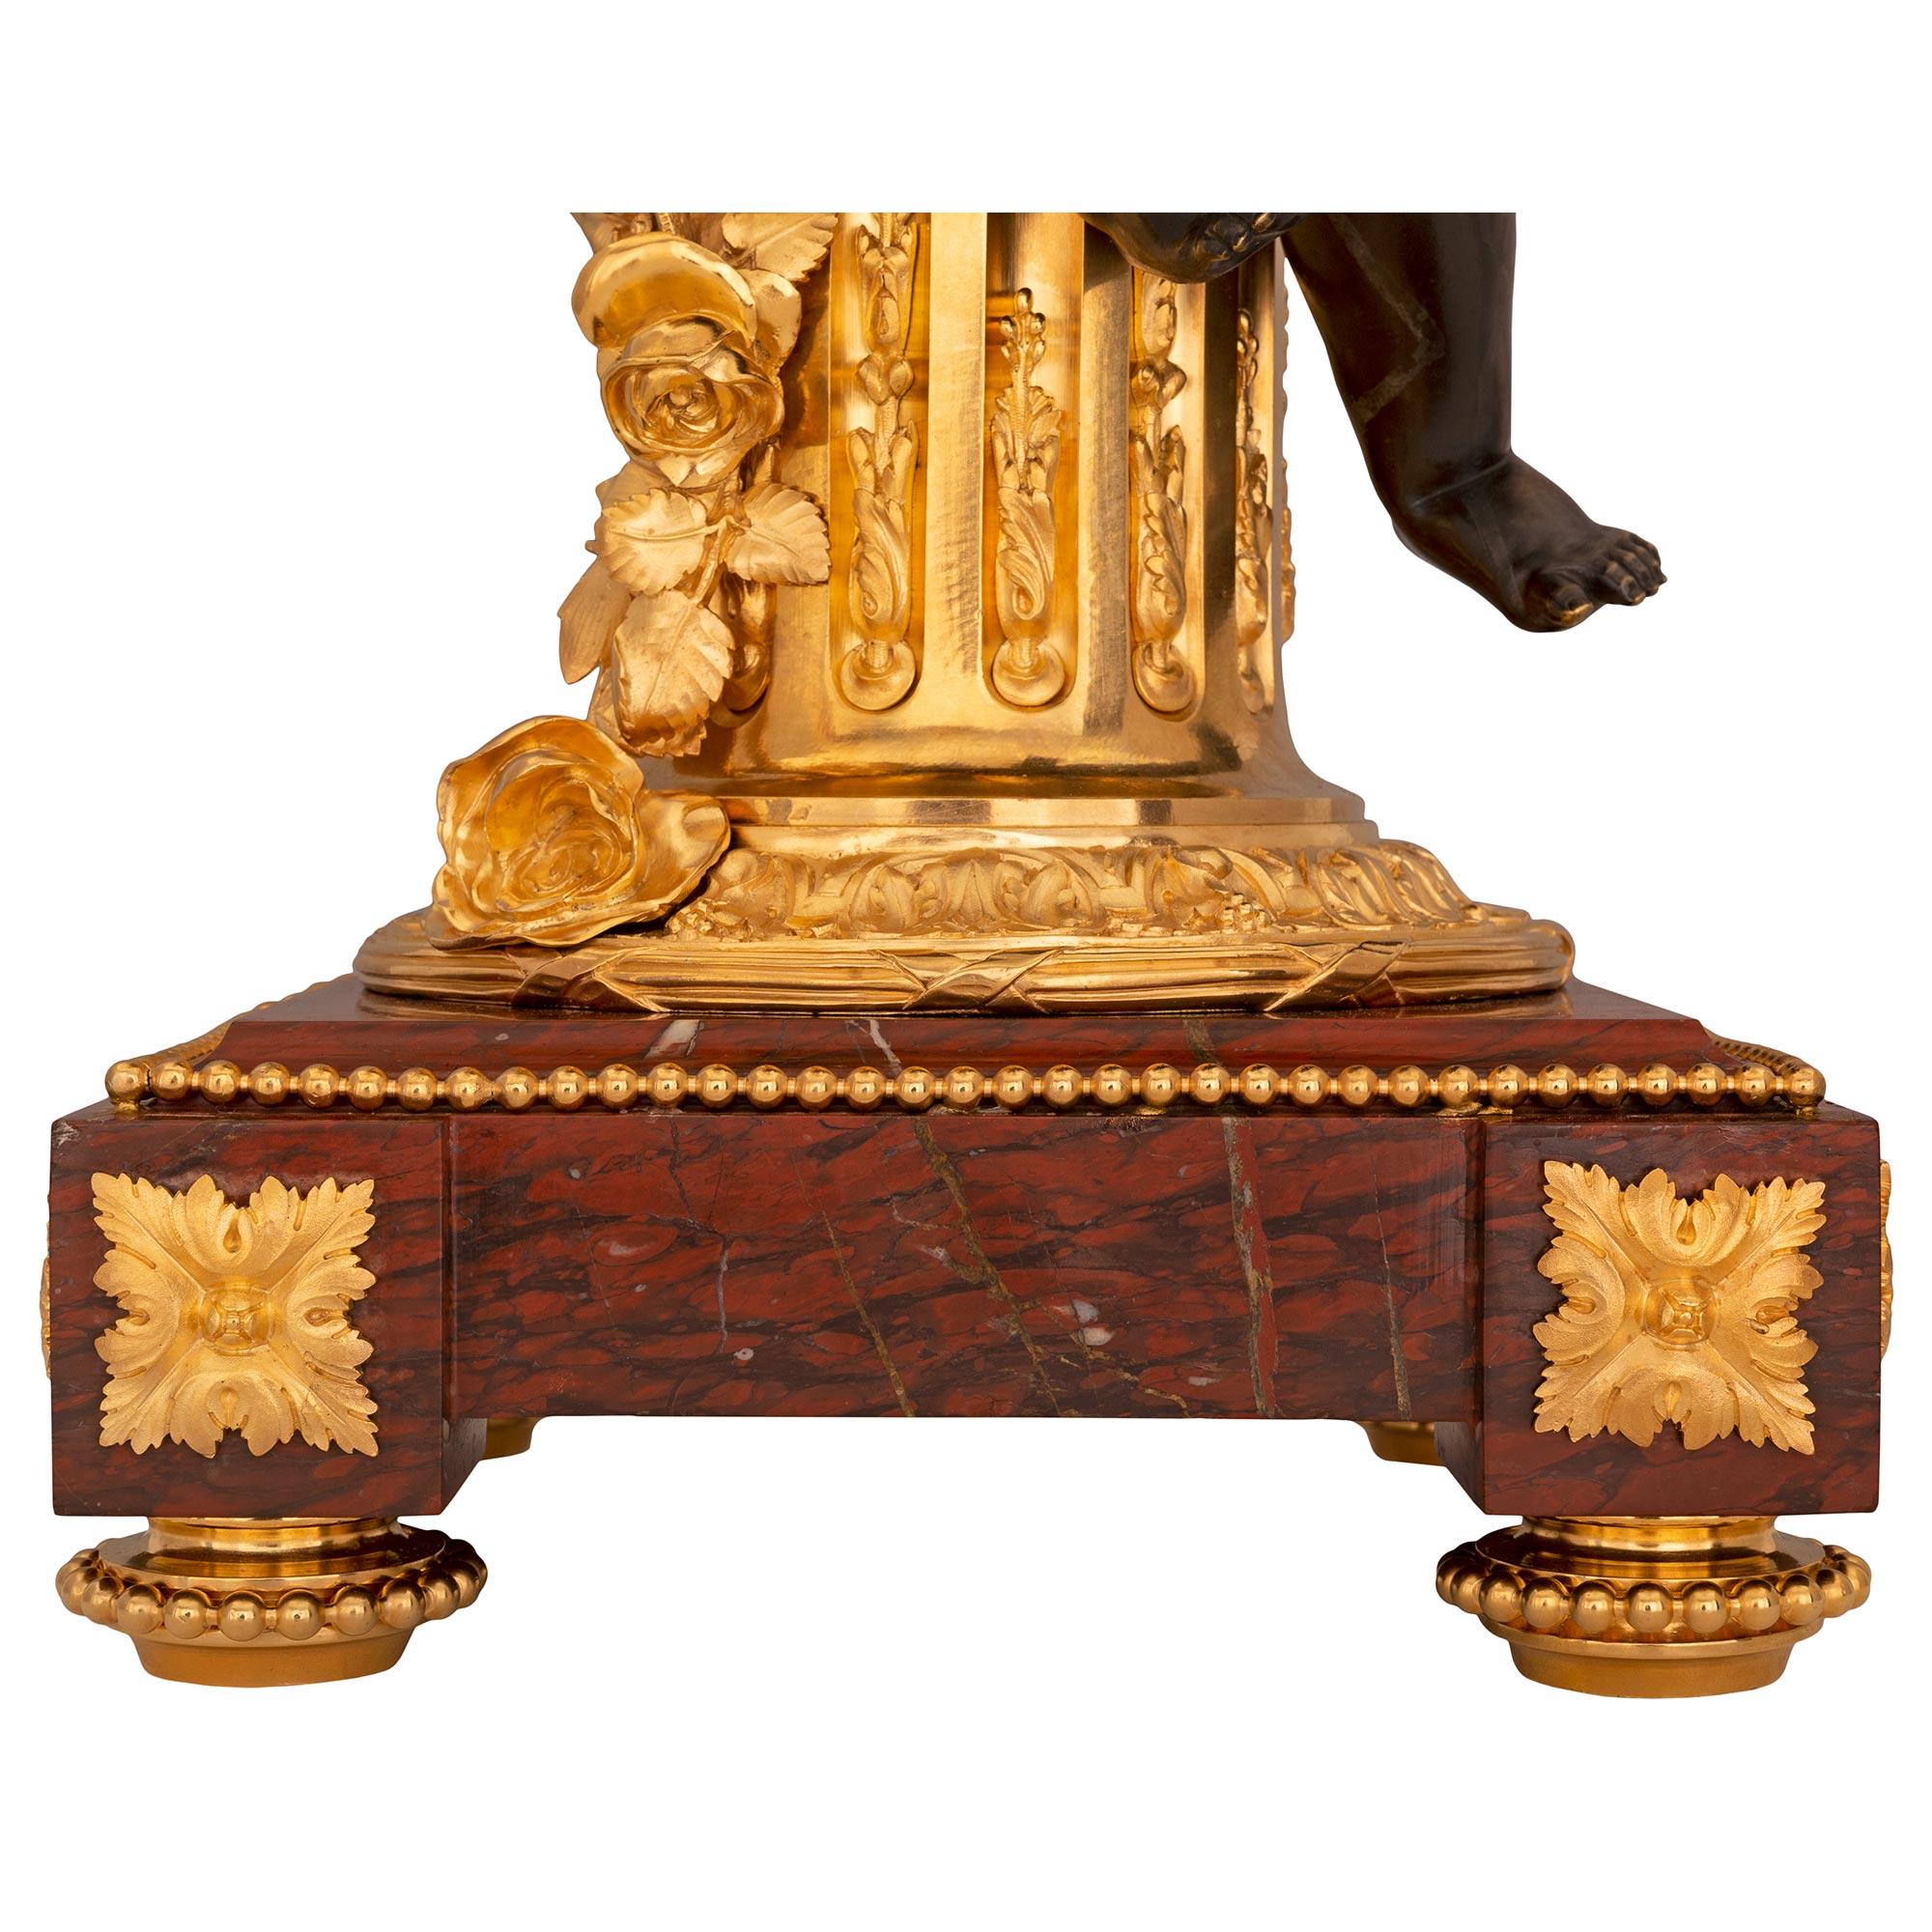 French 19th Century Belle Époque Period Bronze, Ormolu and Marble Clock For Sale 6